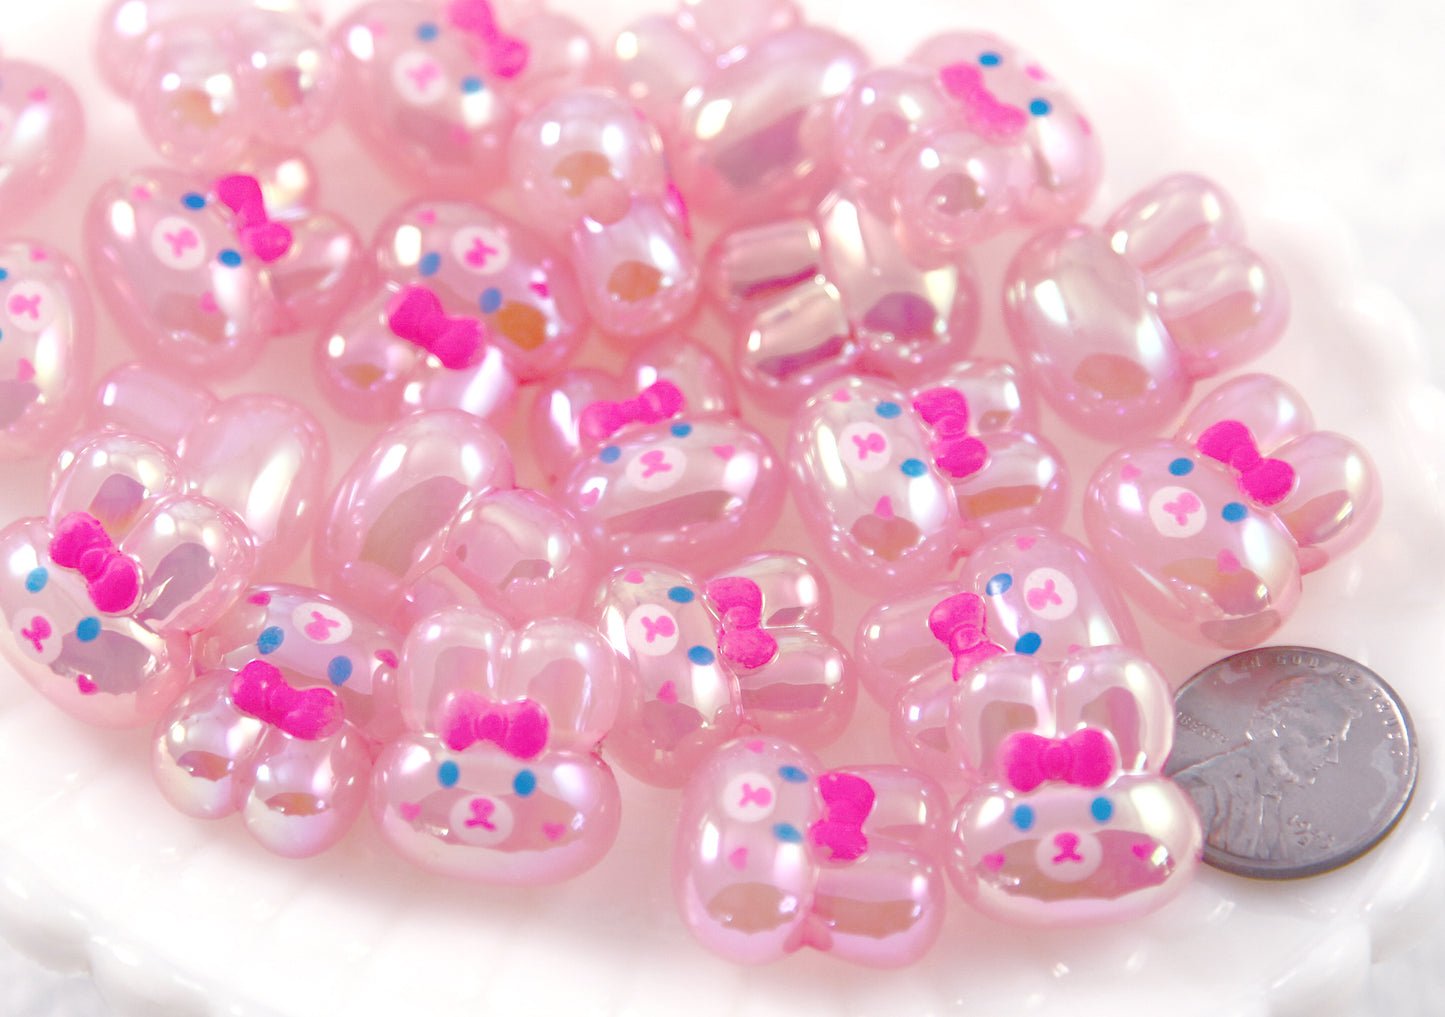 Cute Bunny Beads - 20mm AB Pink Bunny Resin or Acrylic Beads - 8 pc set